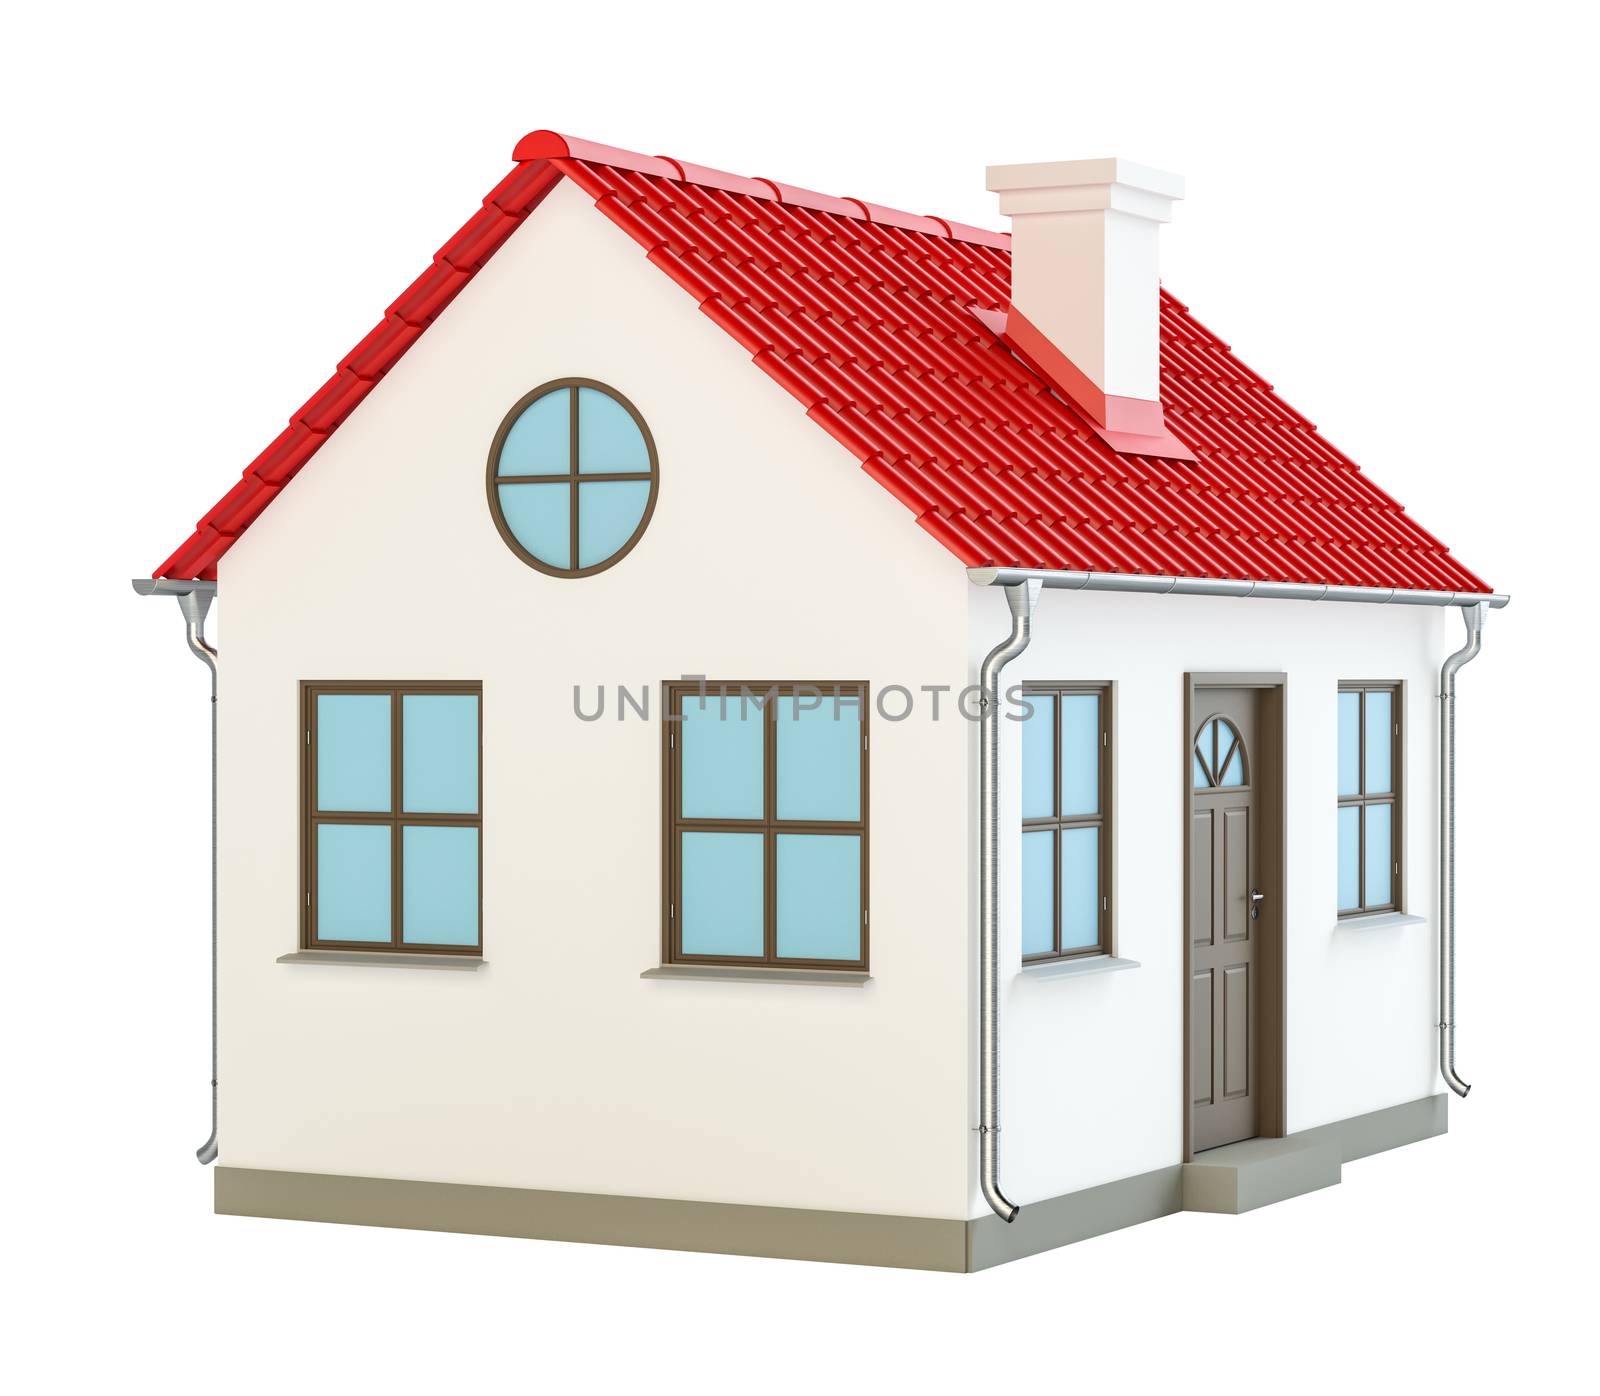 Model of the house on white background by cherezoff